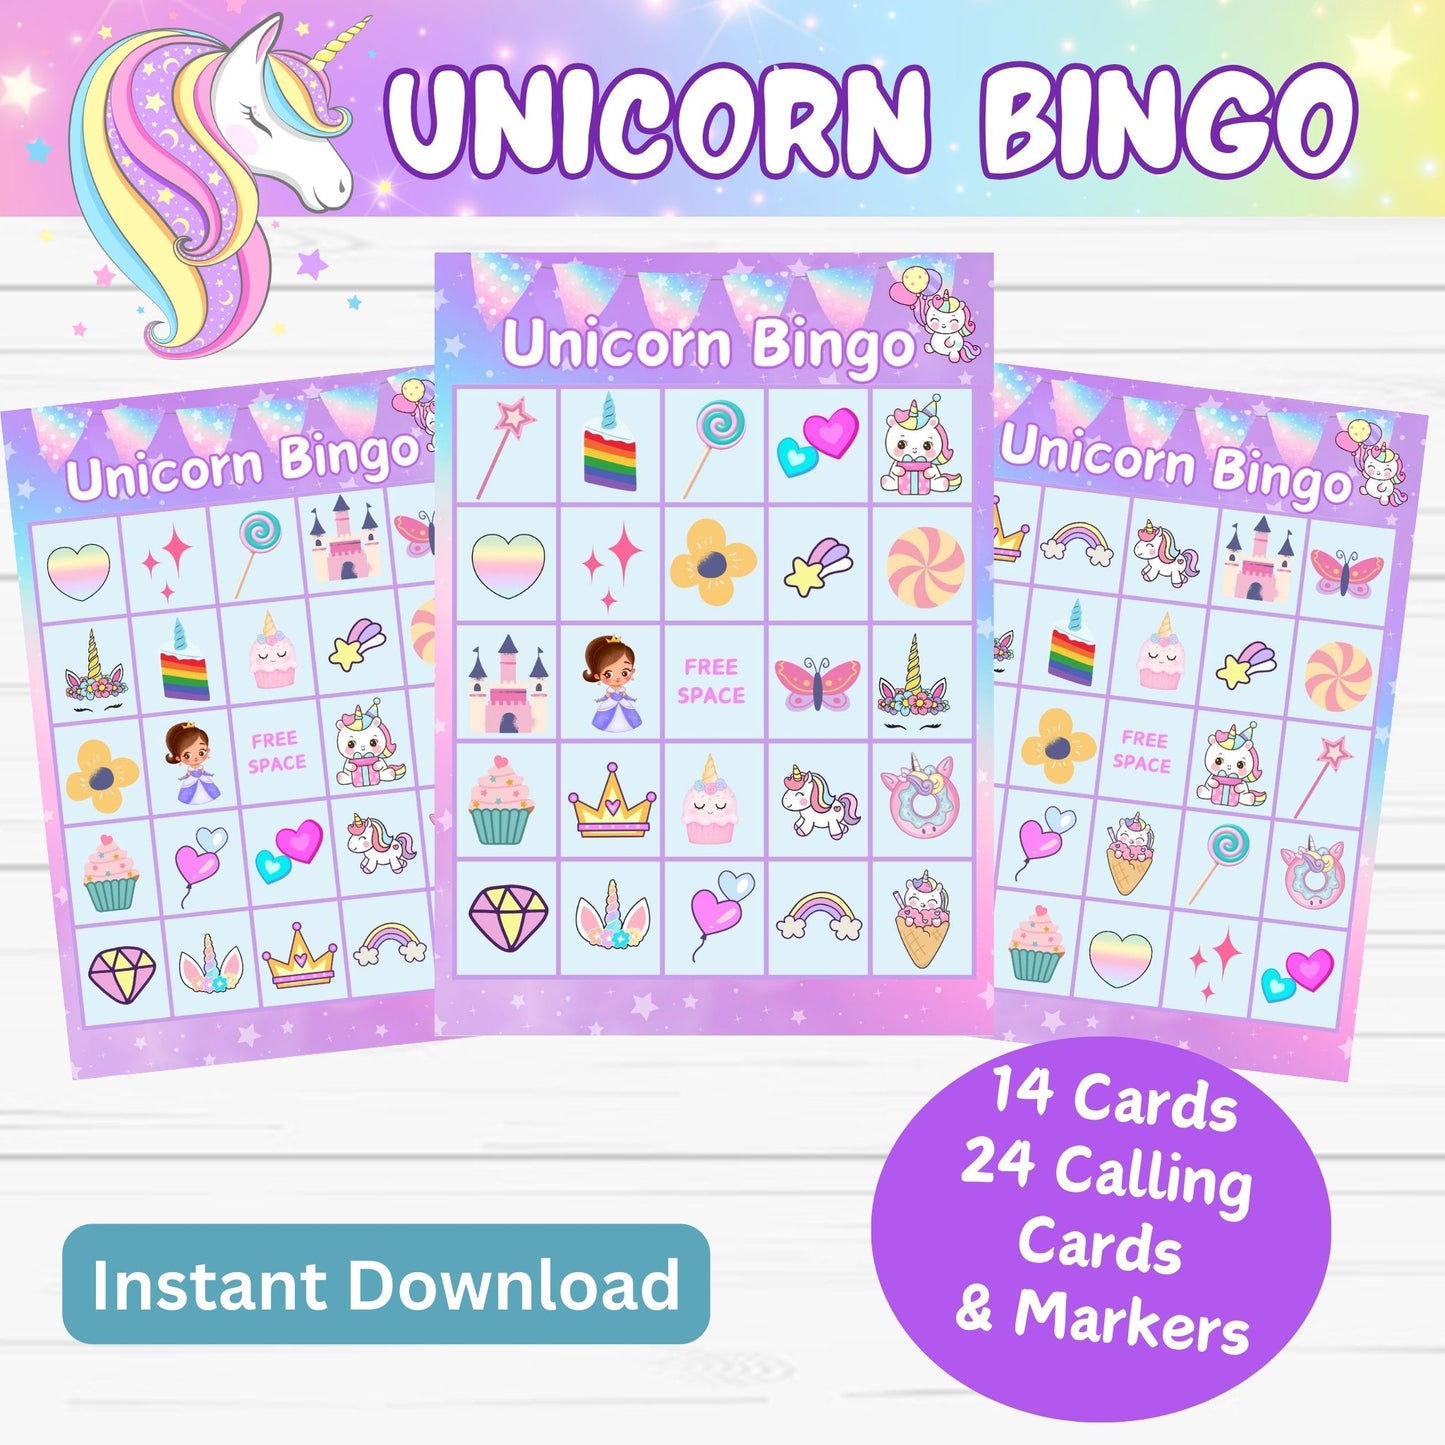 Unicorn Bingo Game for Kids or Family- Instant Download